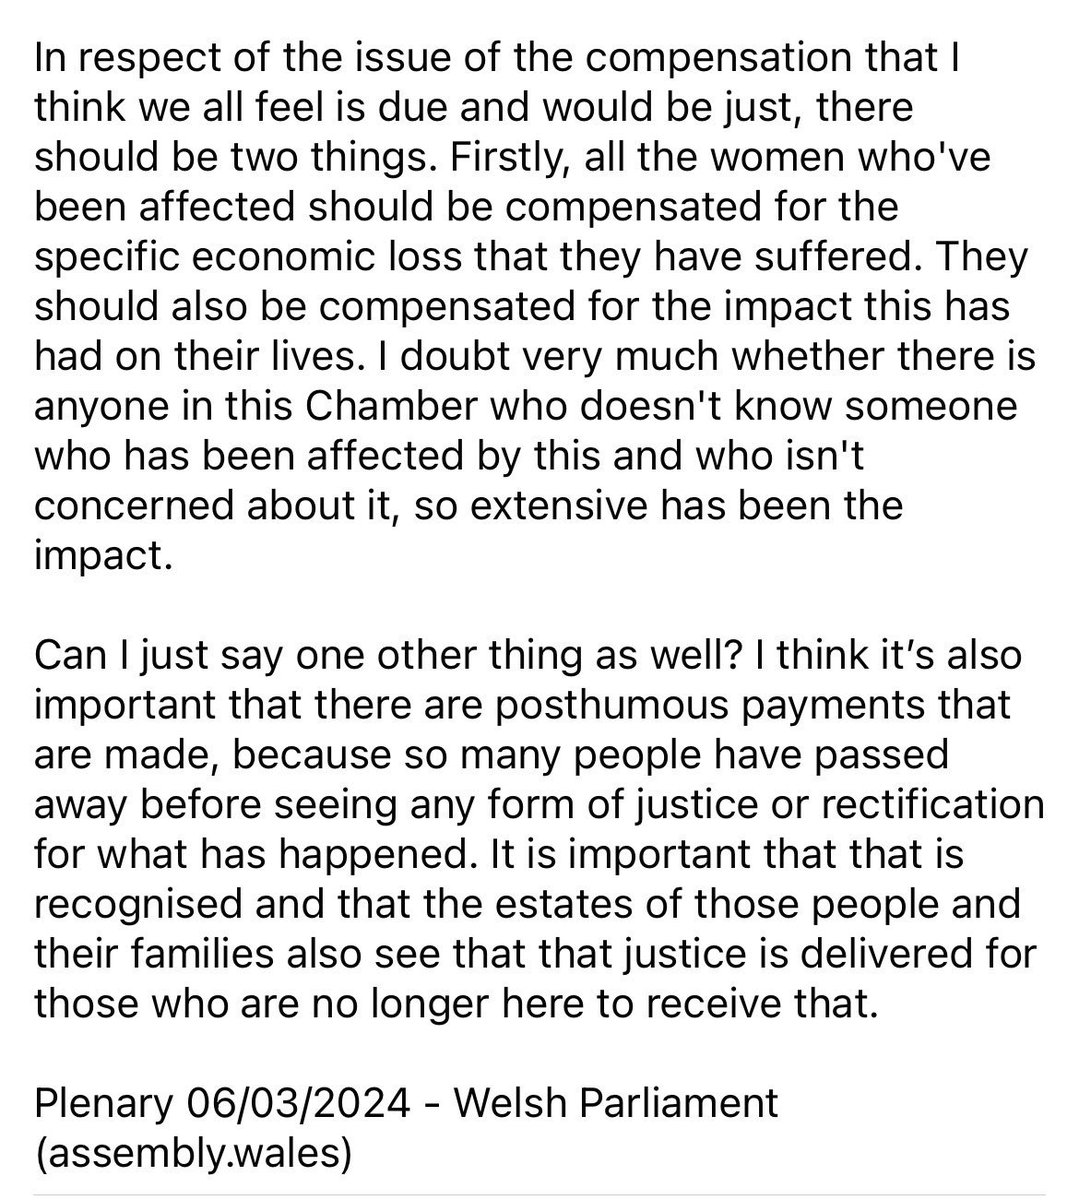 @WASPI_Campaign @UKLabour @AngelaRayner Thank heavens for Welsh Parliament. After years of meeting with #50sWomen from across multiple groups in Wales, this is the “Ask” they’re demanding from the UK Government. @1950sOf @_PJFSW_ @KrisGibson13 @jj2210 @wepaidinupayout @Plaid_Cymru ✊